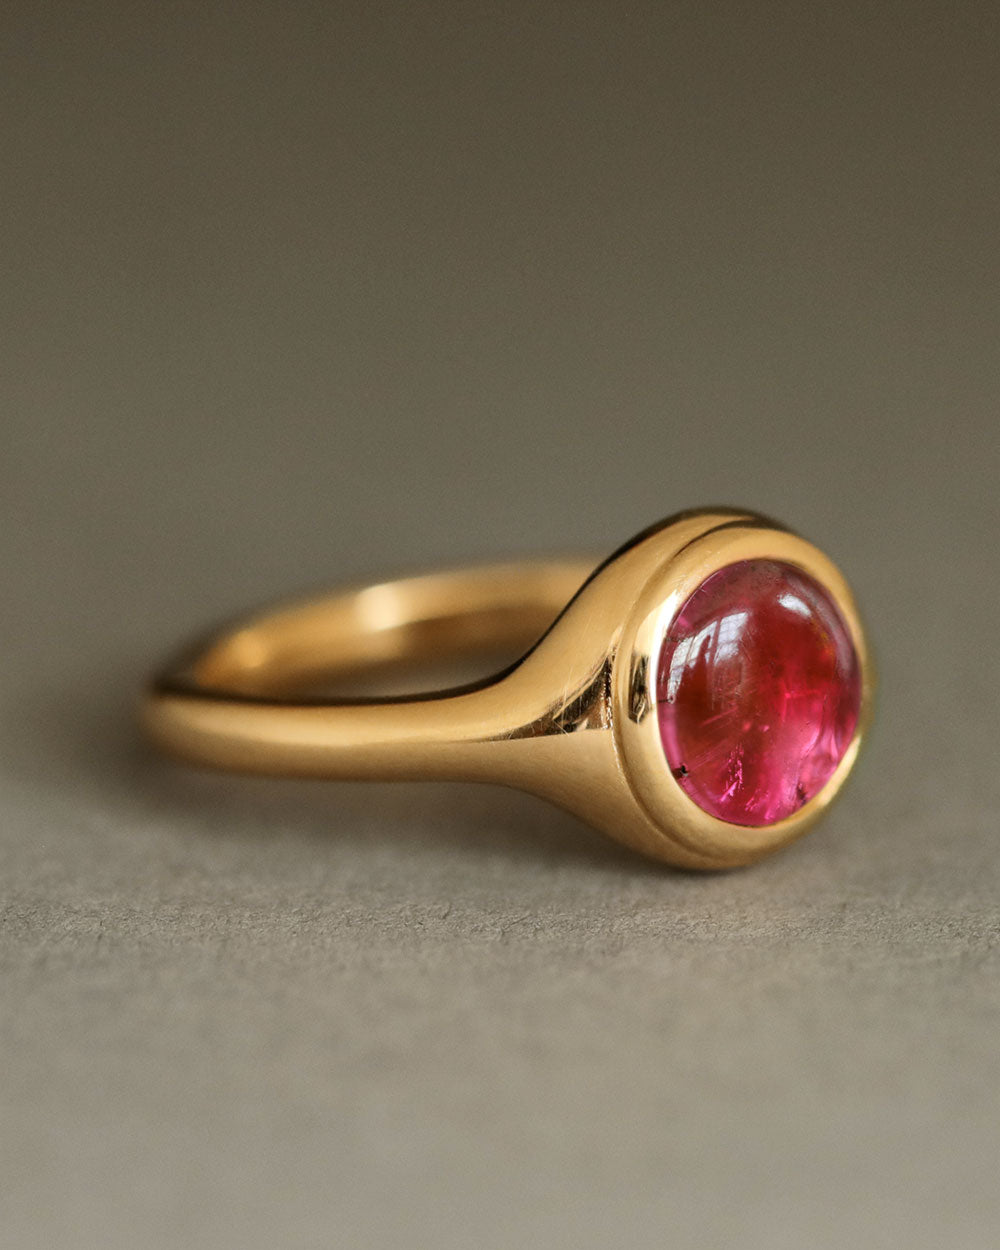 Duchess Ring by George Rings pink tourmaline cabochon solid 18k yellow gold